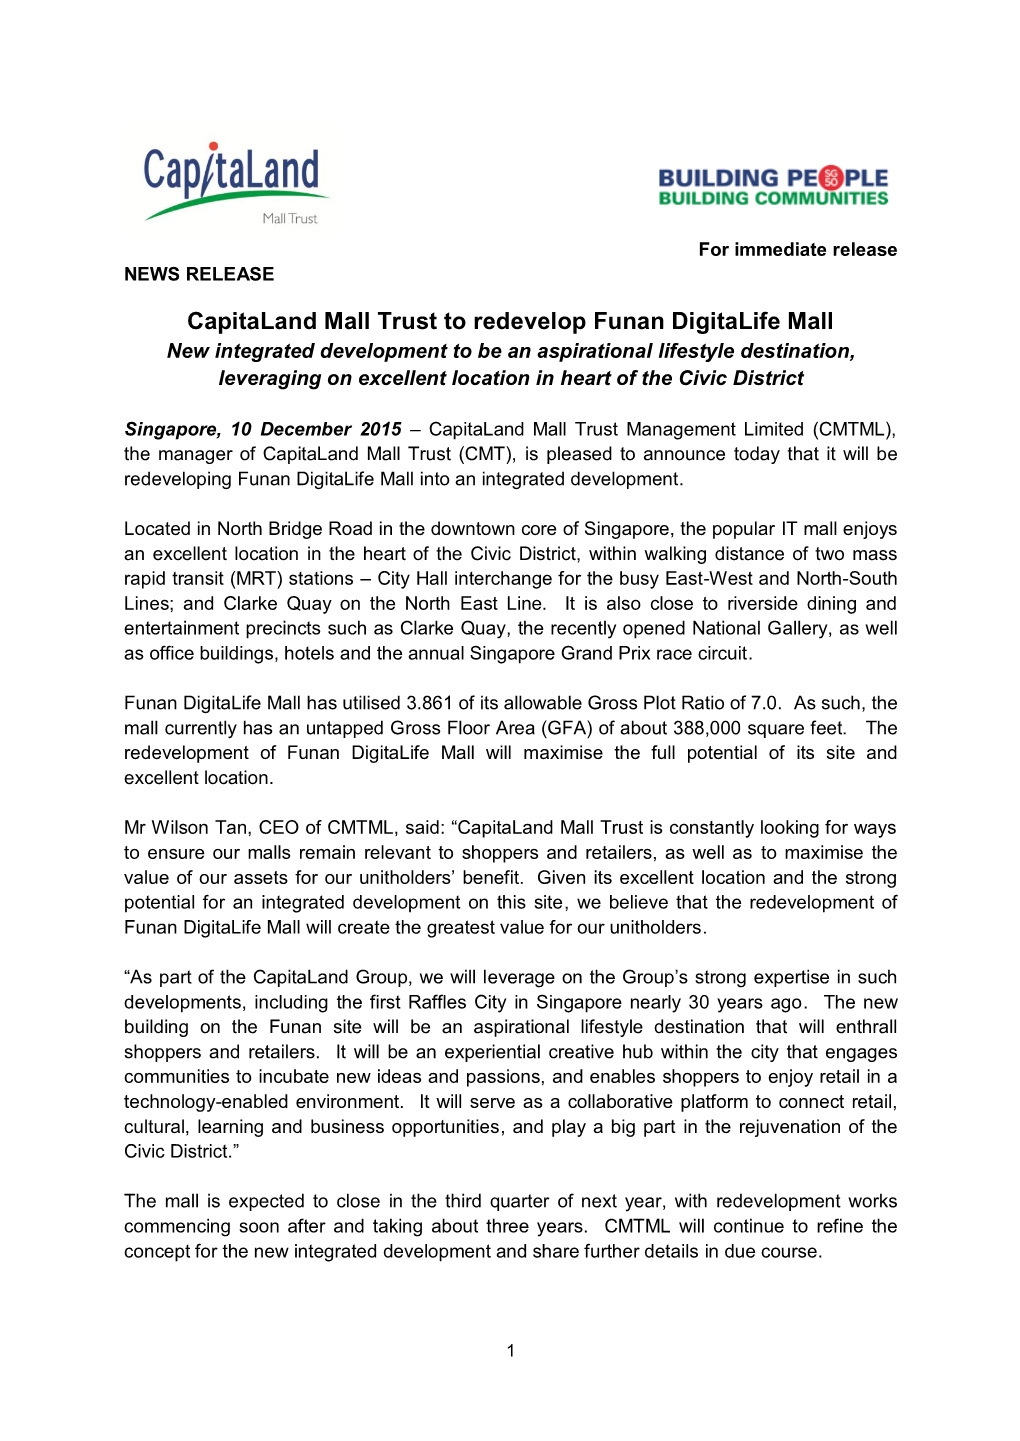 Capitaland Mall Trust to Redevelop Funan Digitalife Mall